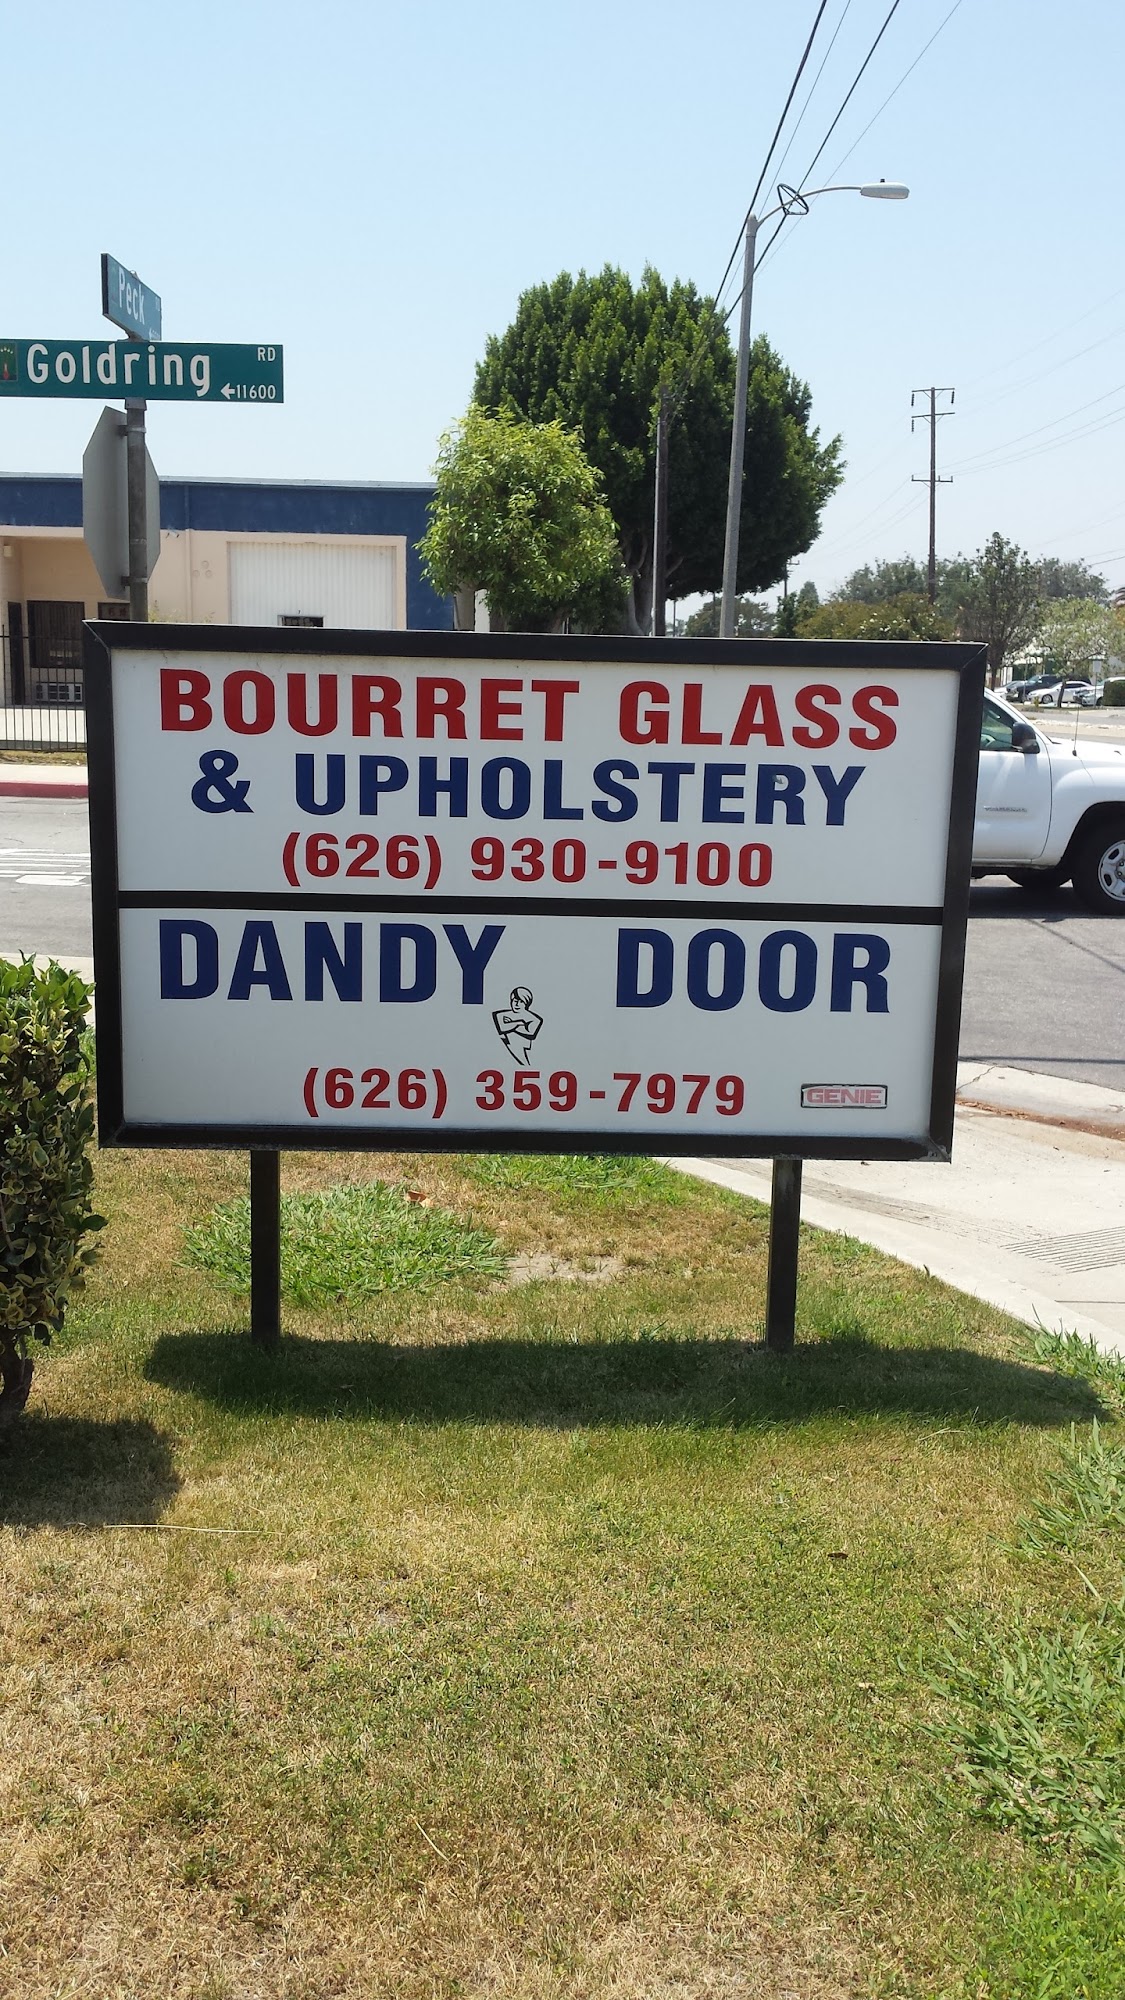 Bourret Glass & Upholstery